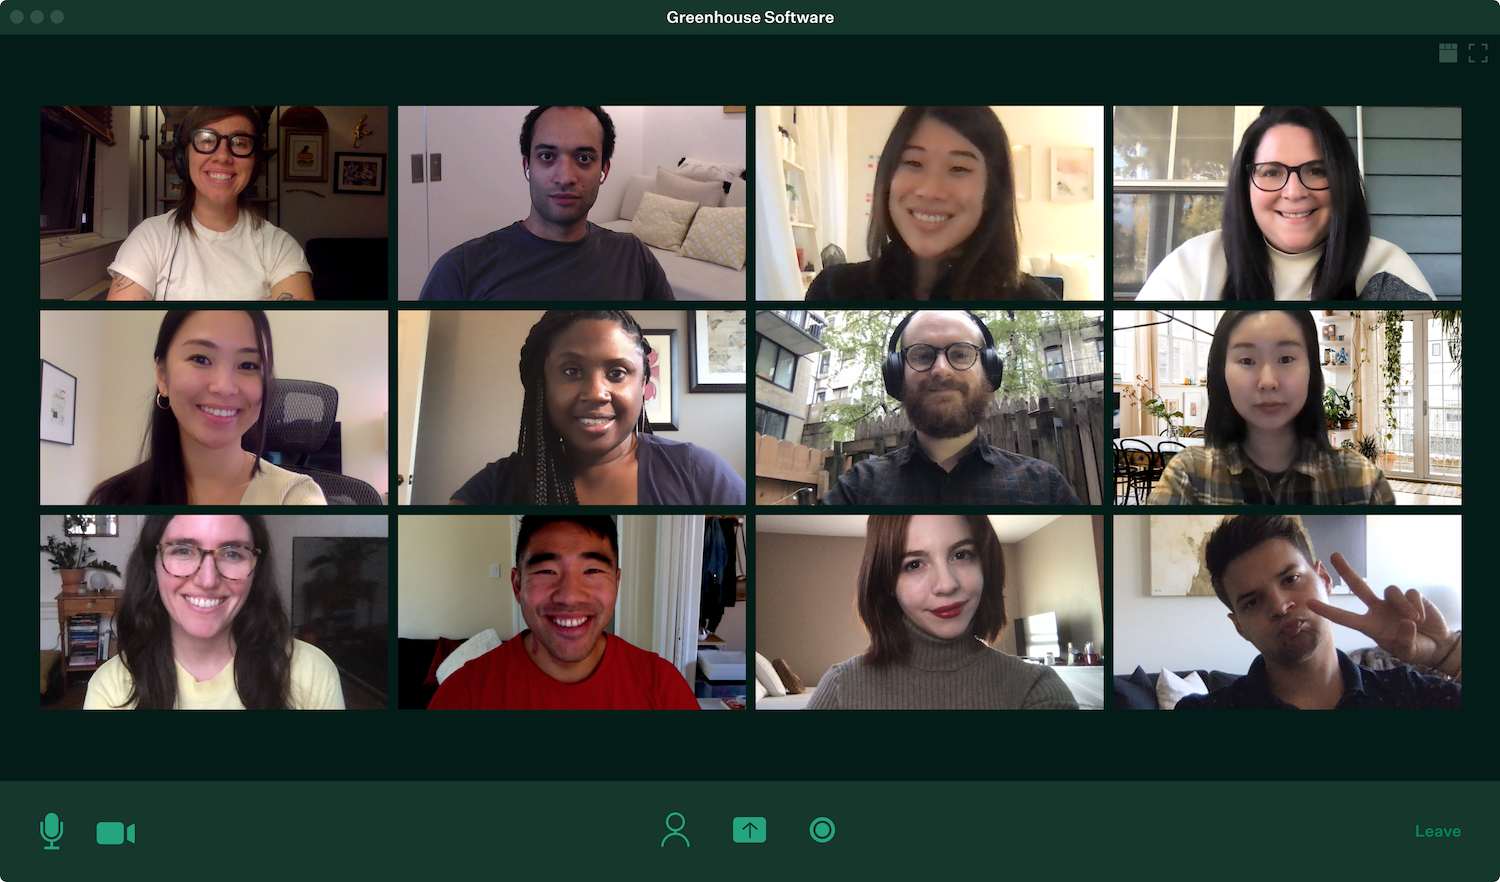 Snapshot of Greenhouse team video call faces on a grid